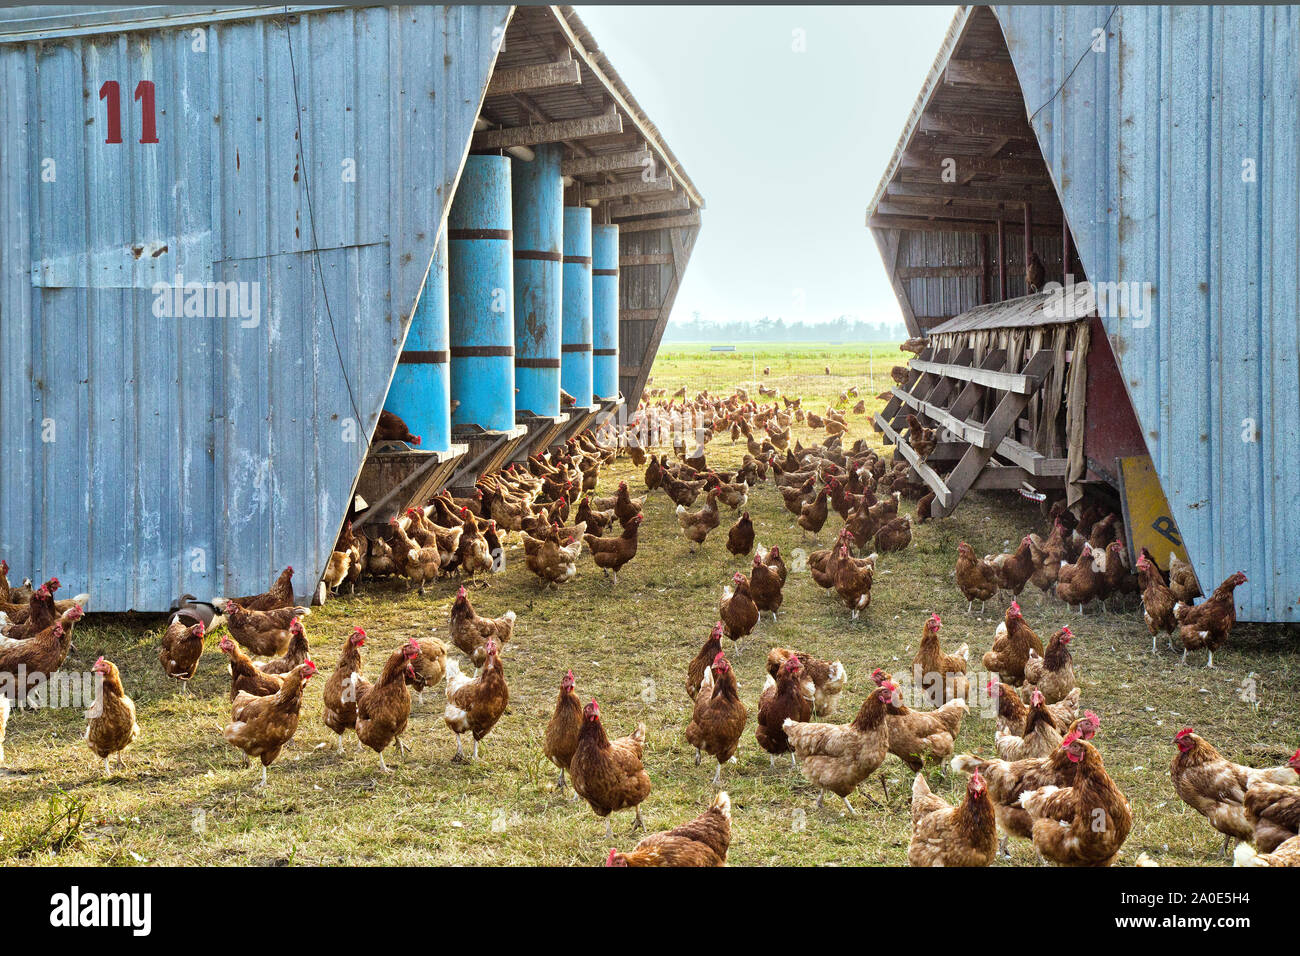 Free Range Chickens  'Gallus domesticus', organic egg production, portable chicken house. Stock Photo